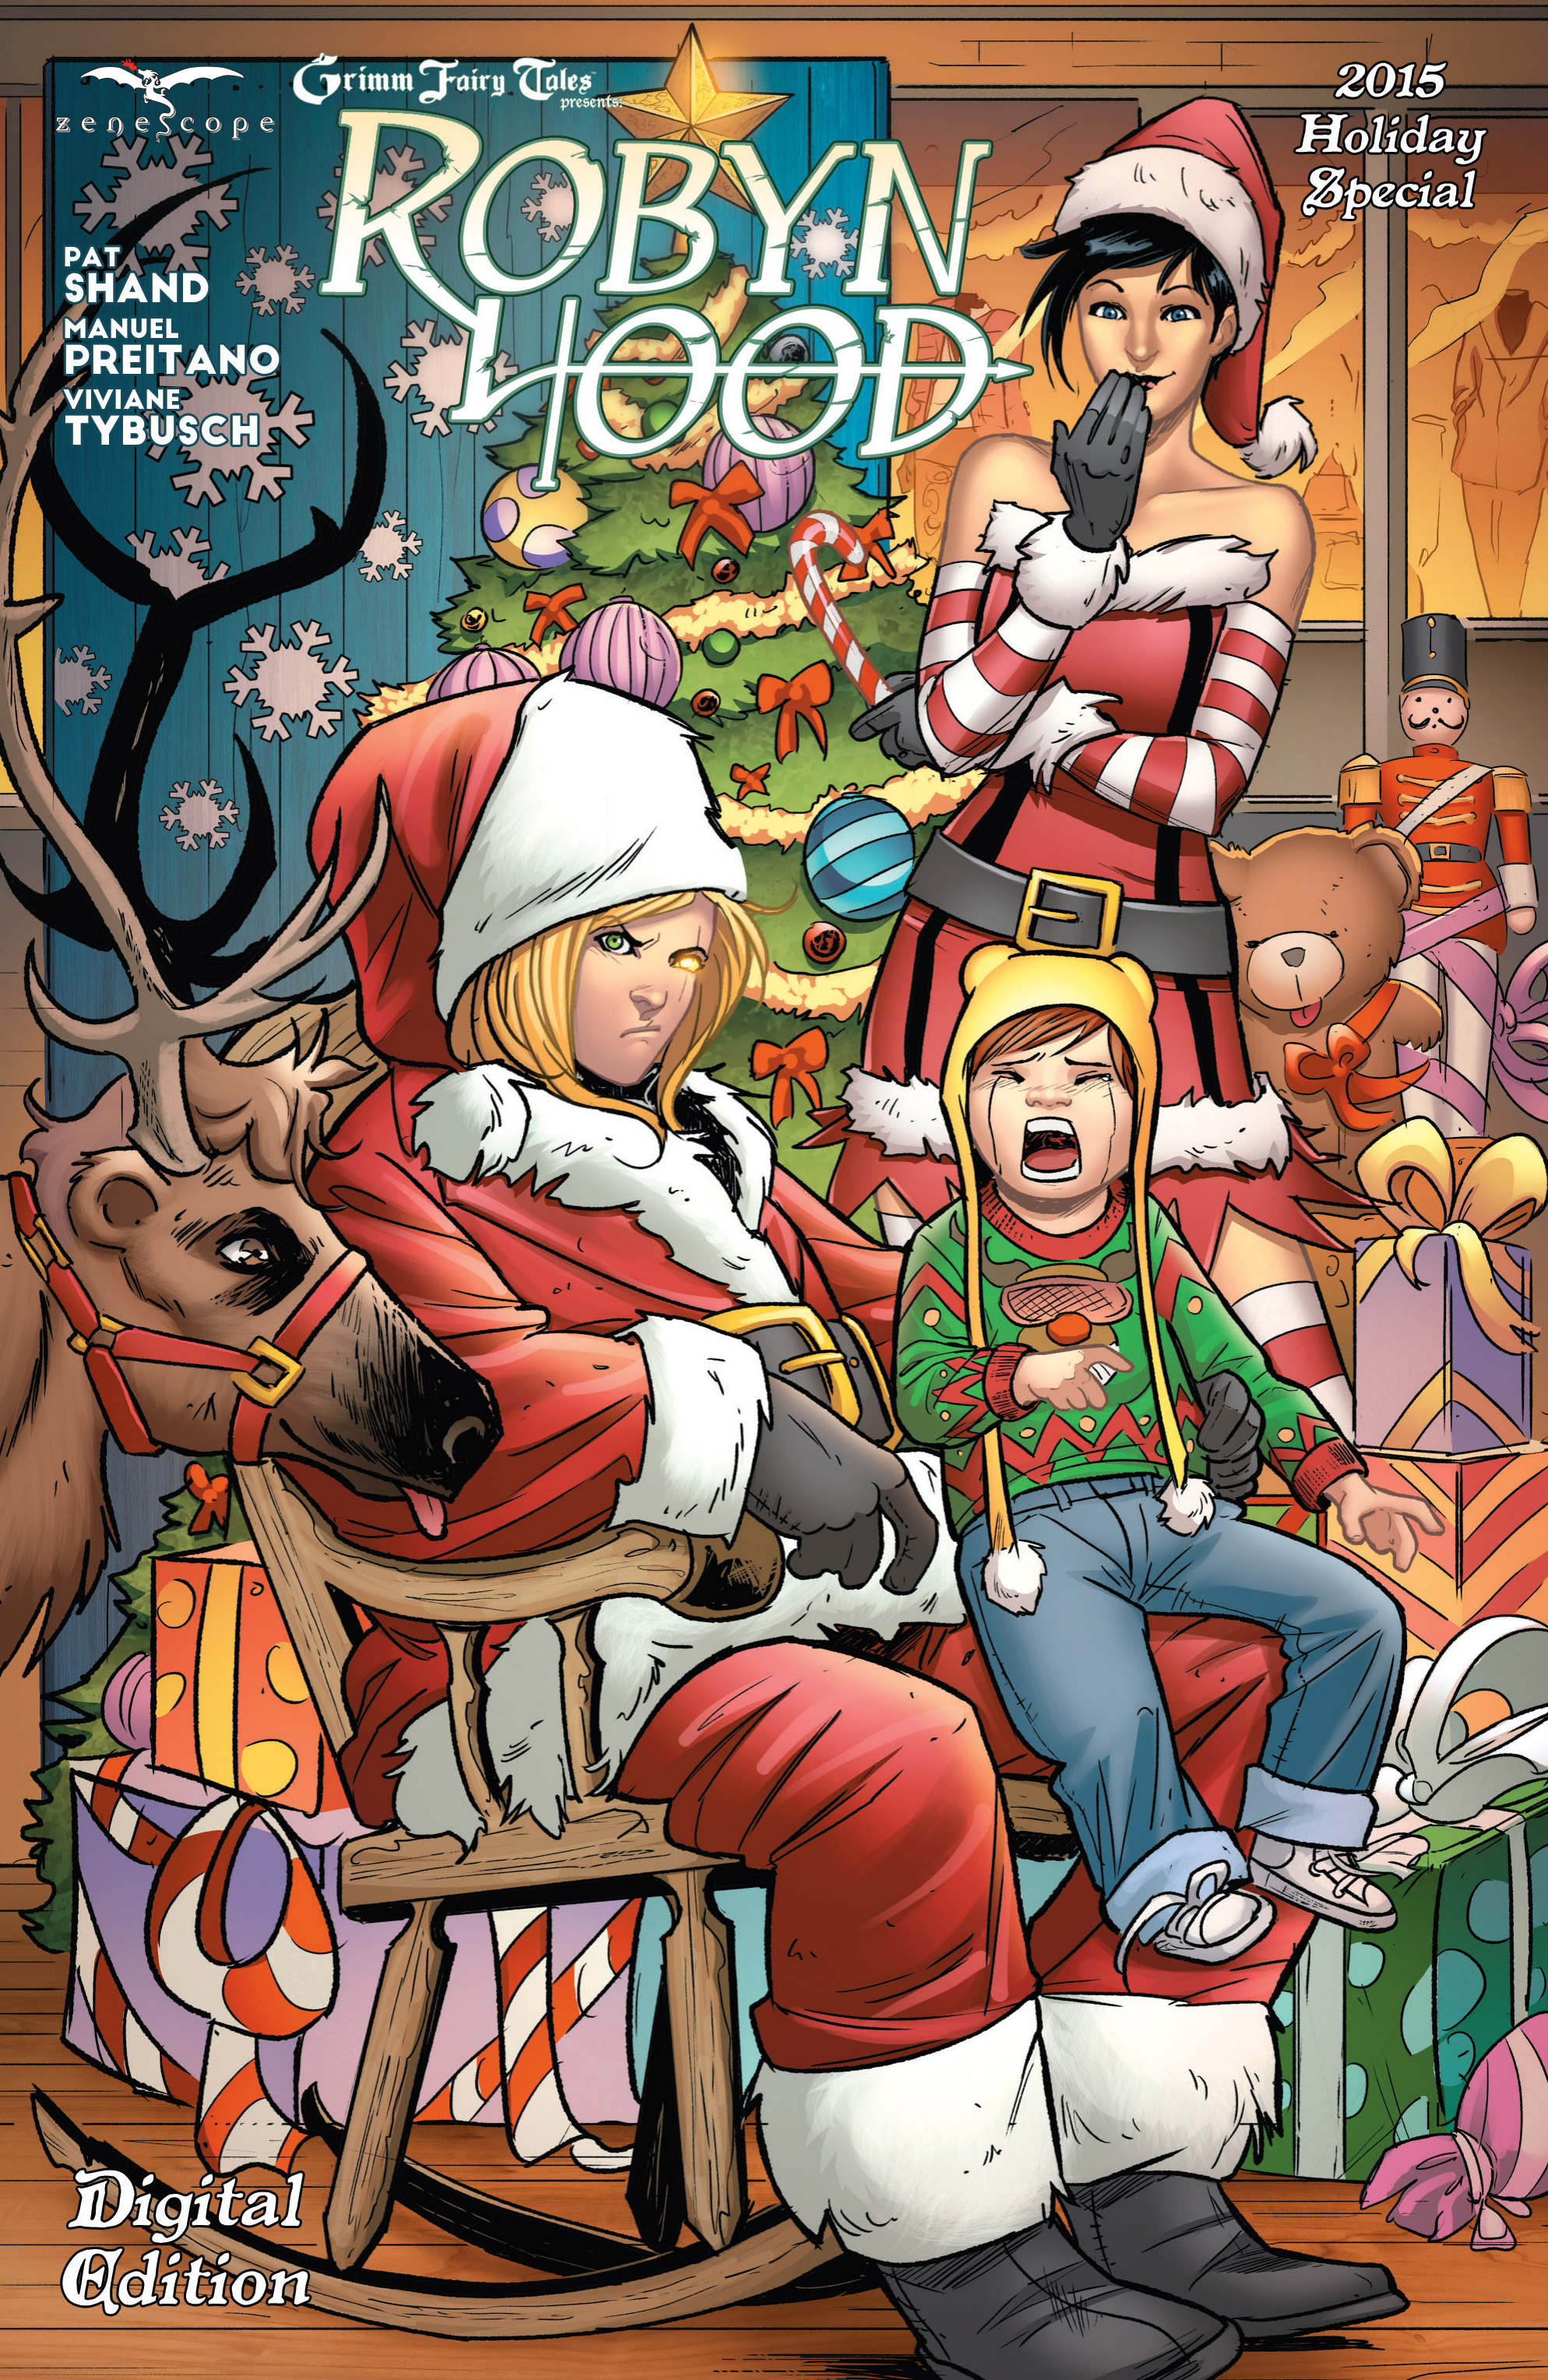 Read online Grimm Fairy Tales presents Robyn Hood 2015 Holiday Special comic -  Issue # Full - 1